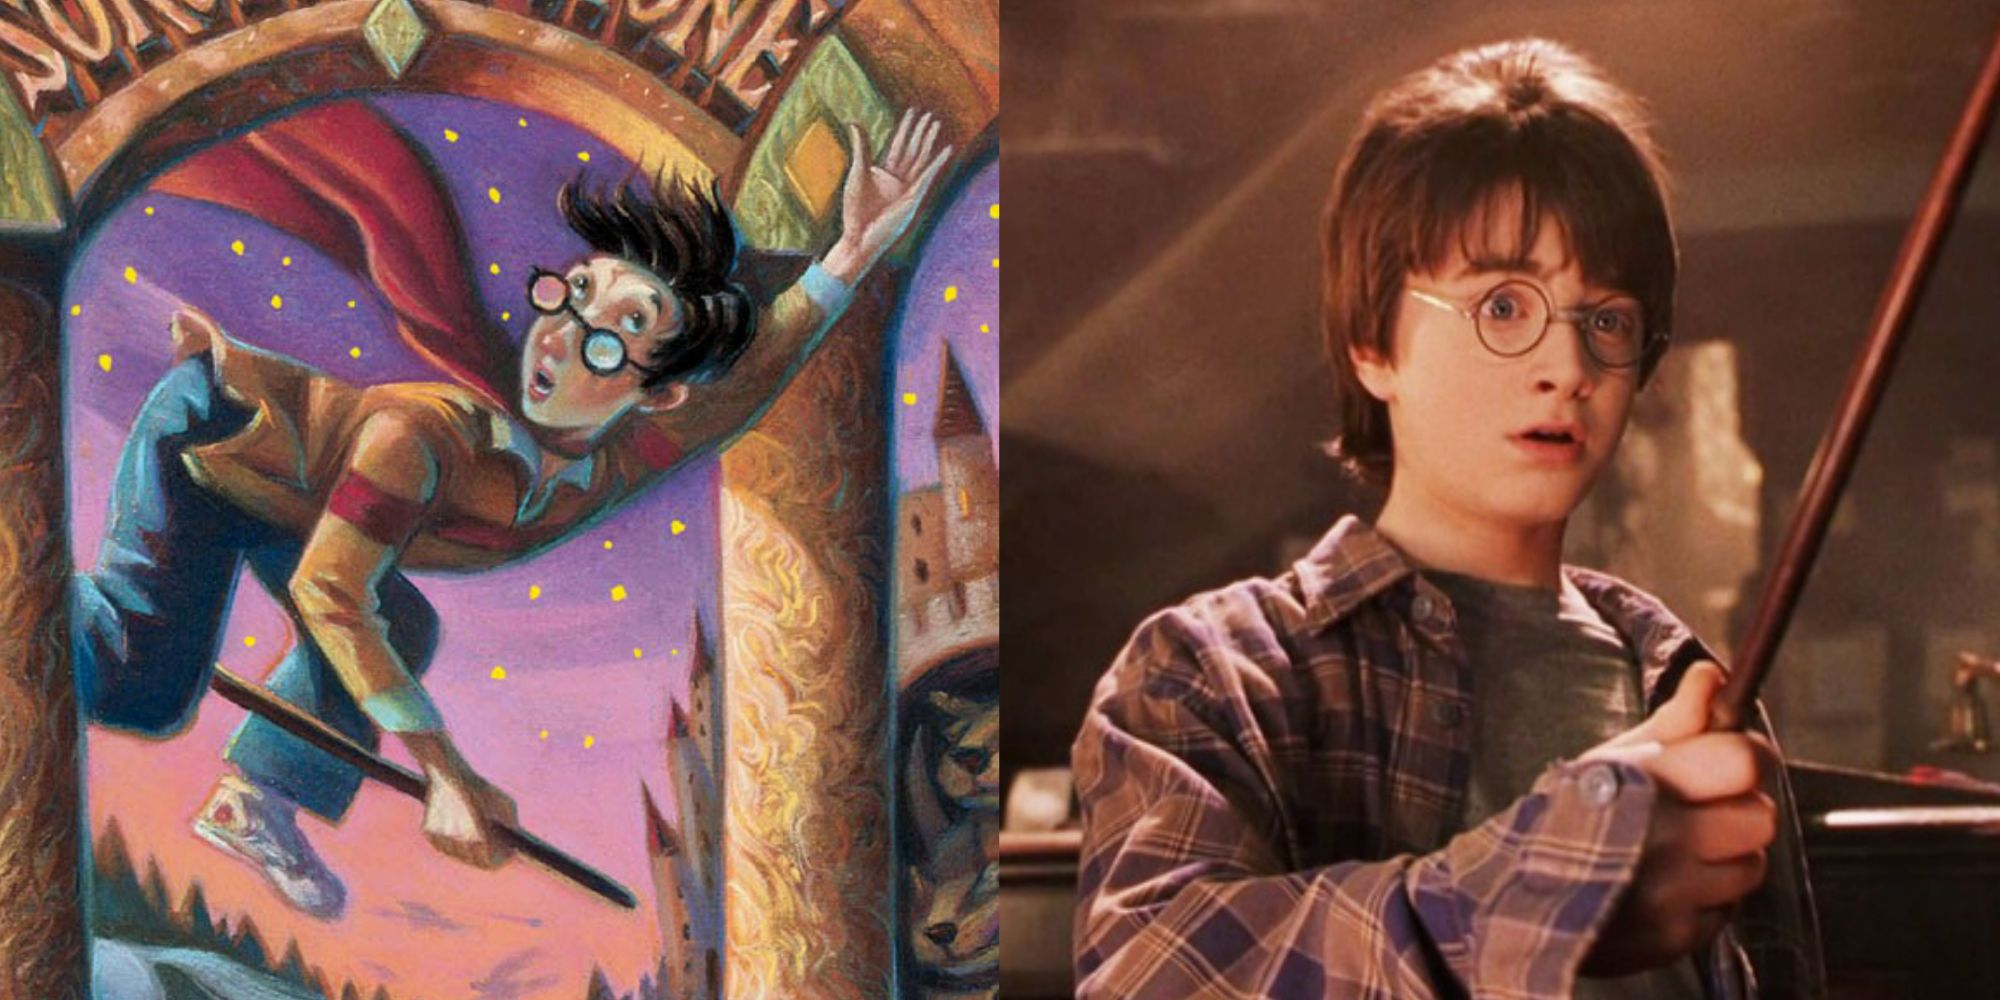 A split image showing the Philosopher's Stone cover on the left and Harry receiving his wand on the right from Harry Potter. 